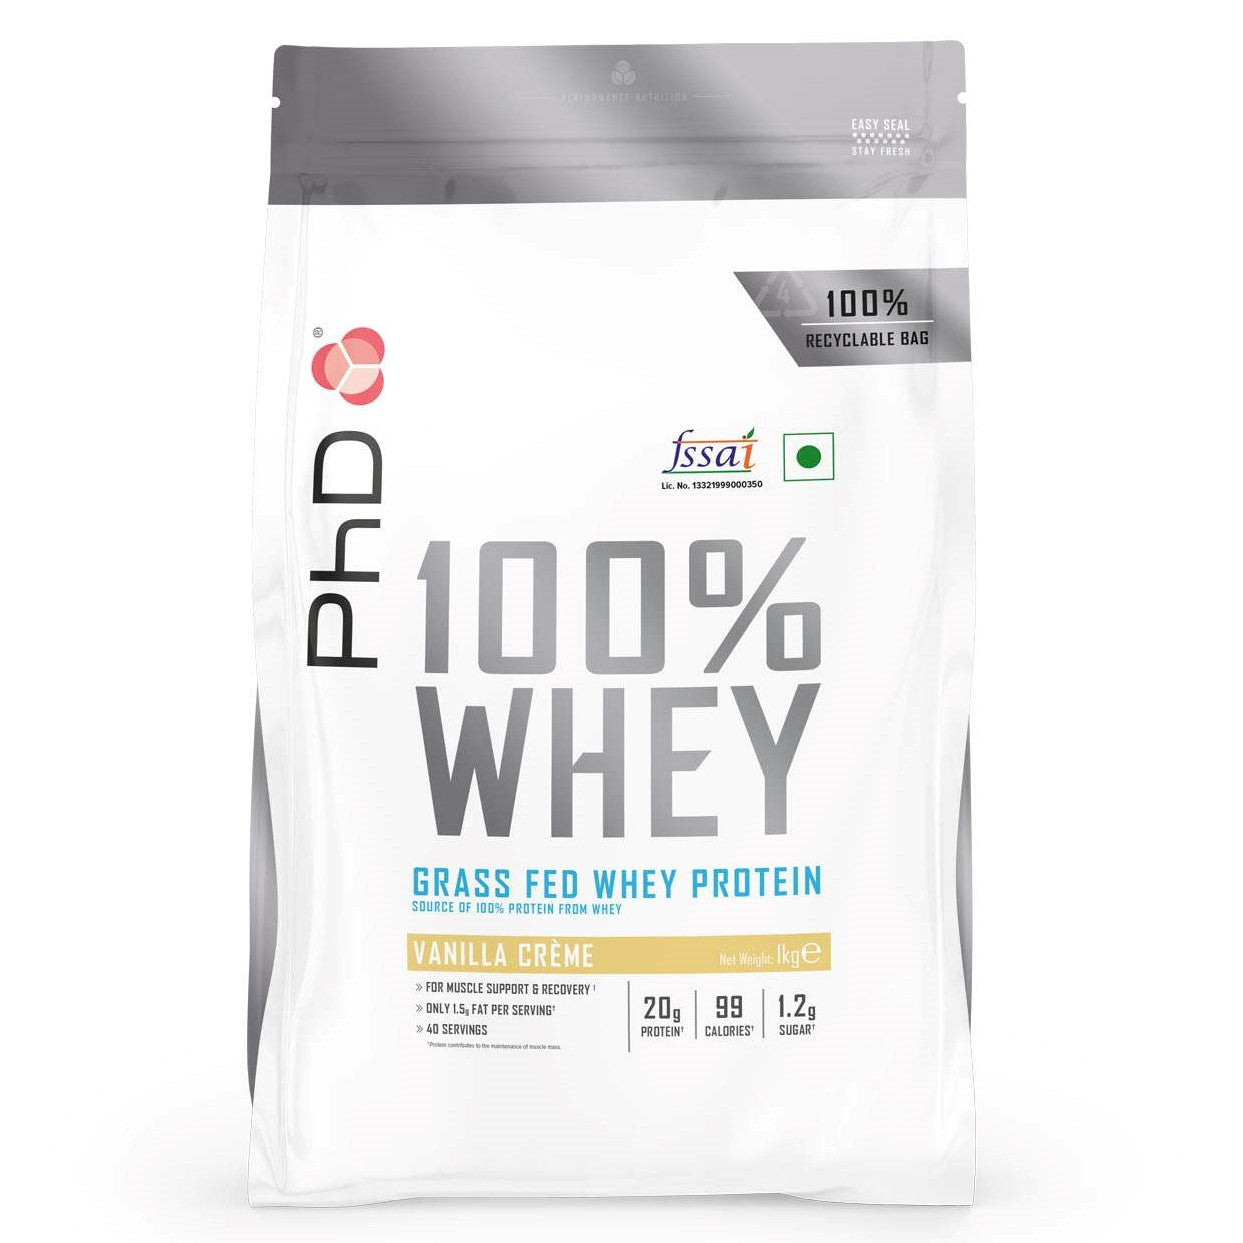 authentic protein supplements 